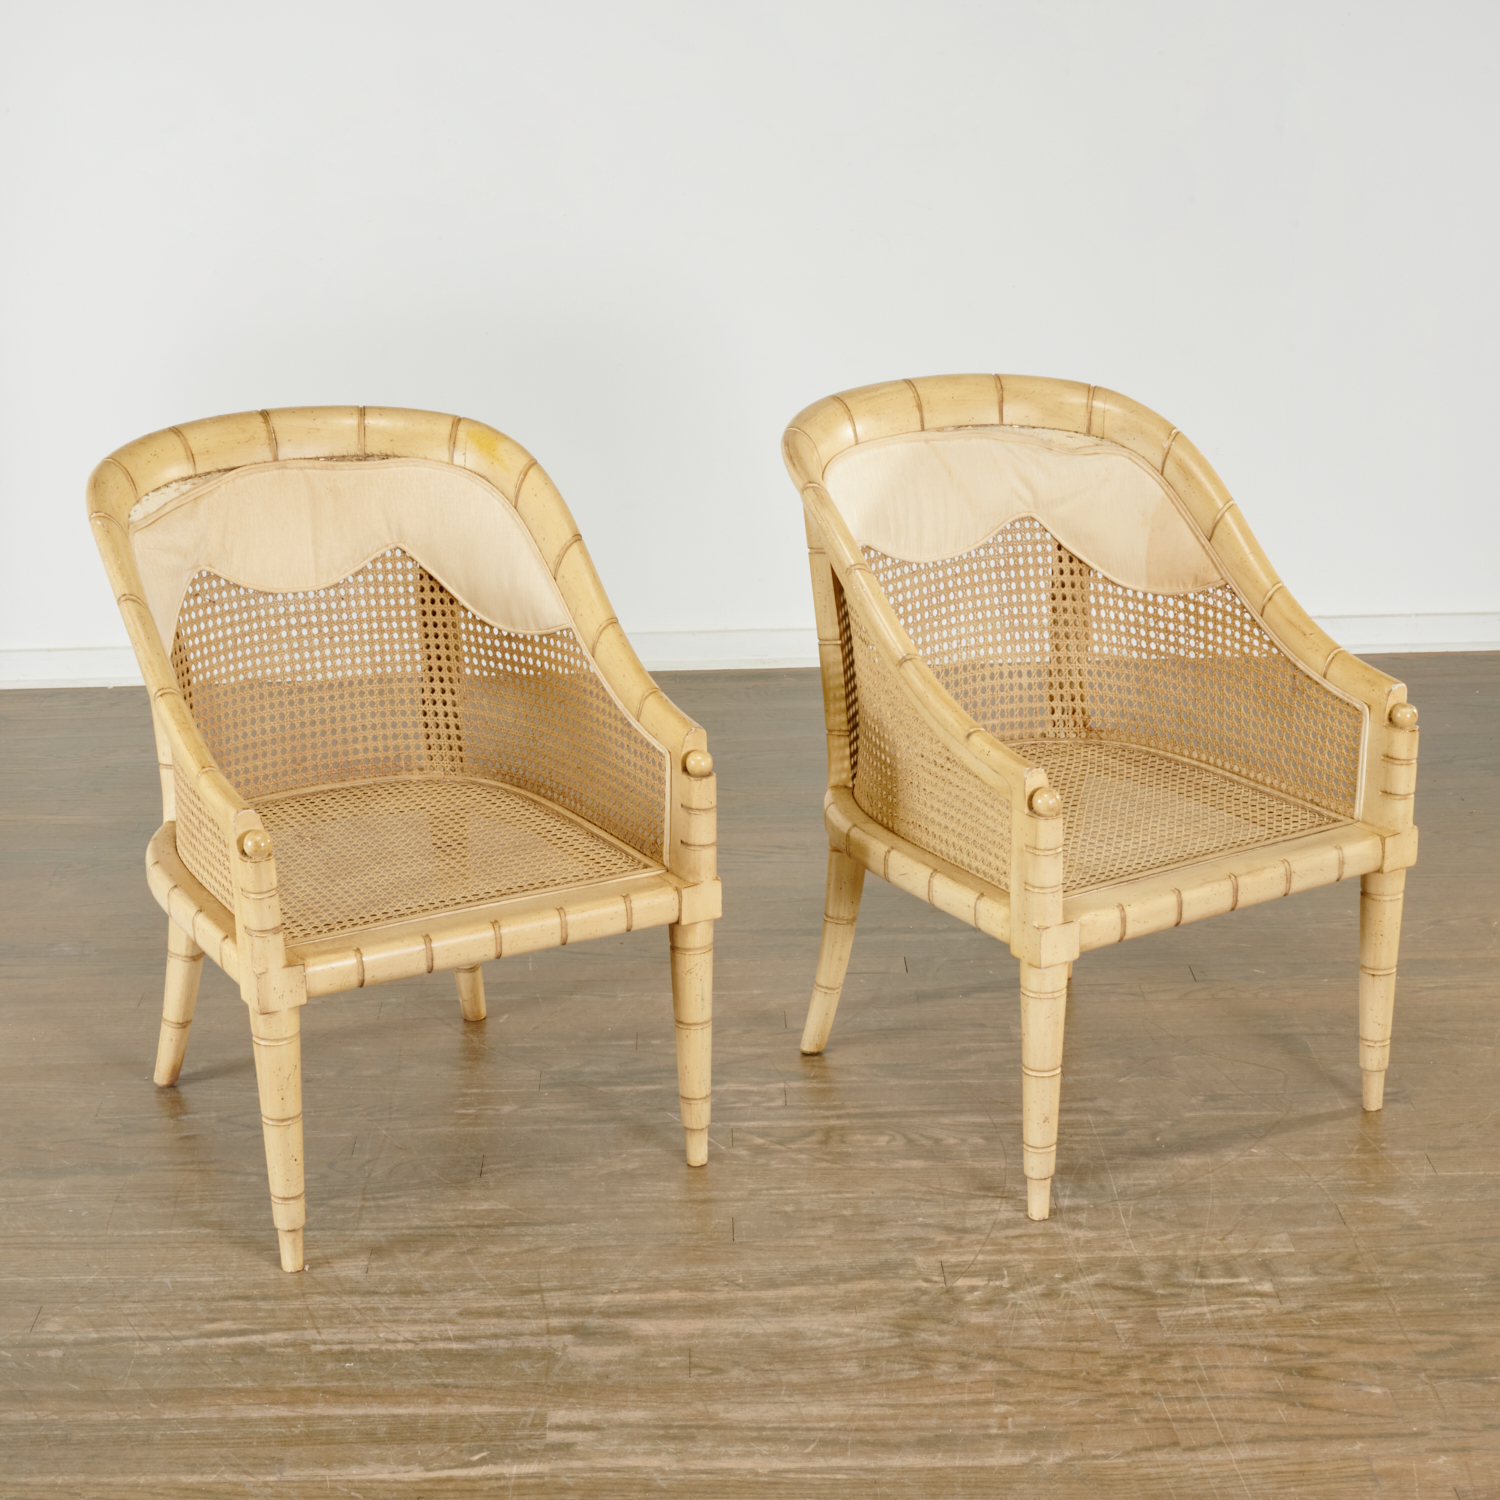 PAIR REGENCY STYLE CANED "BAMBOO"